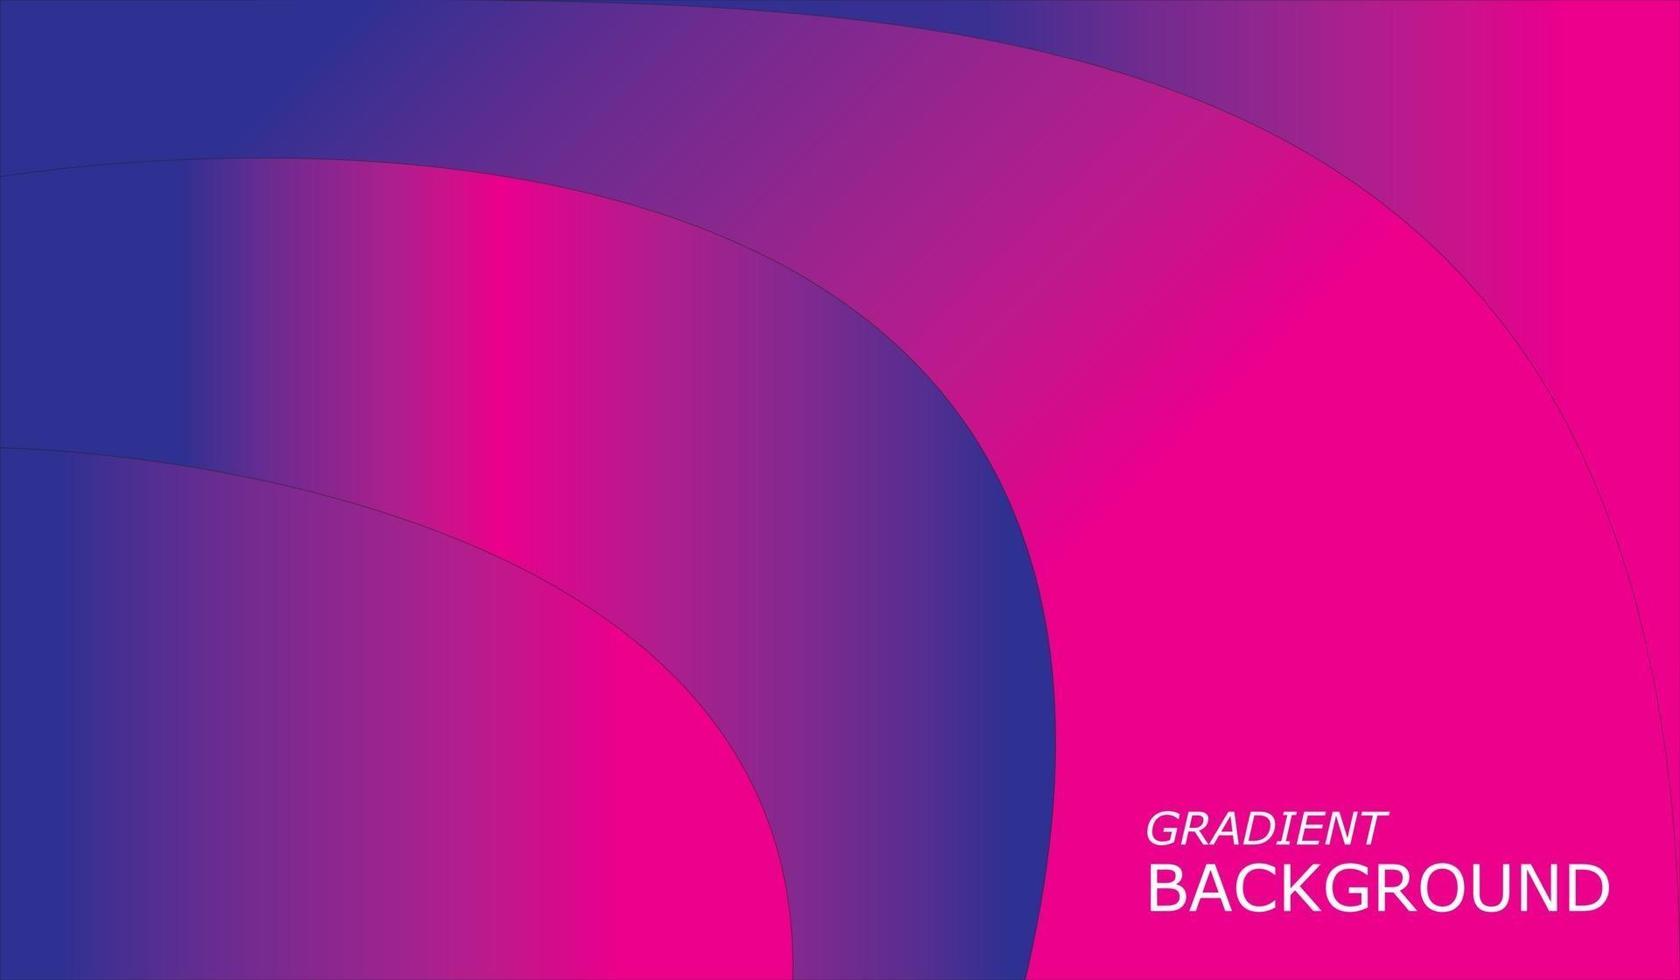 Colorful holographic gradient background design vector